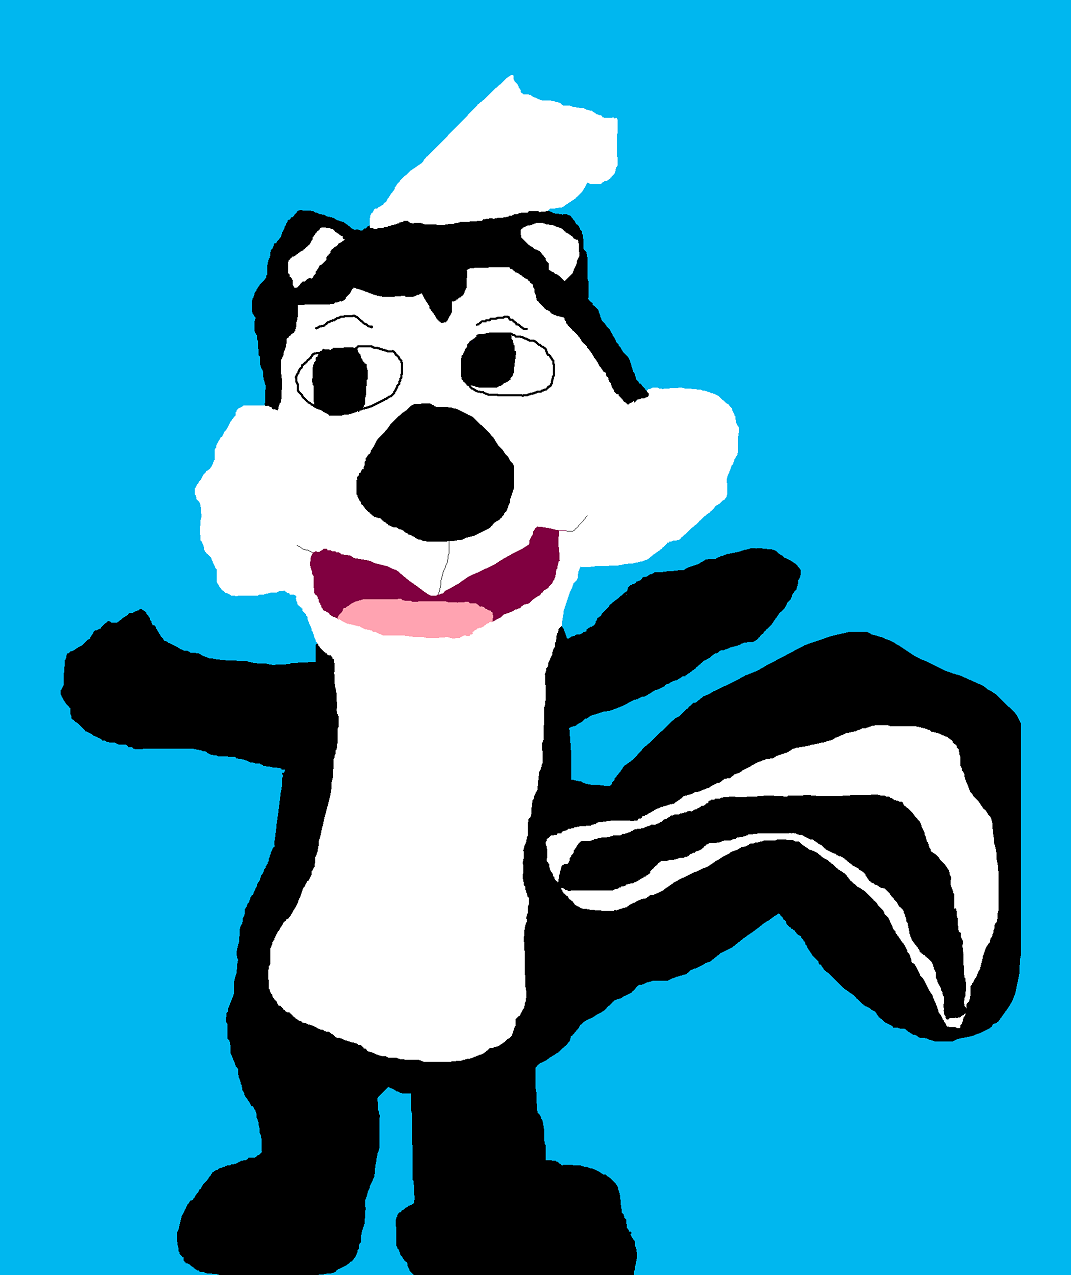 Pepe Le Pew Ms Paint New For 2014 by Falconlobo